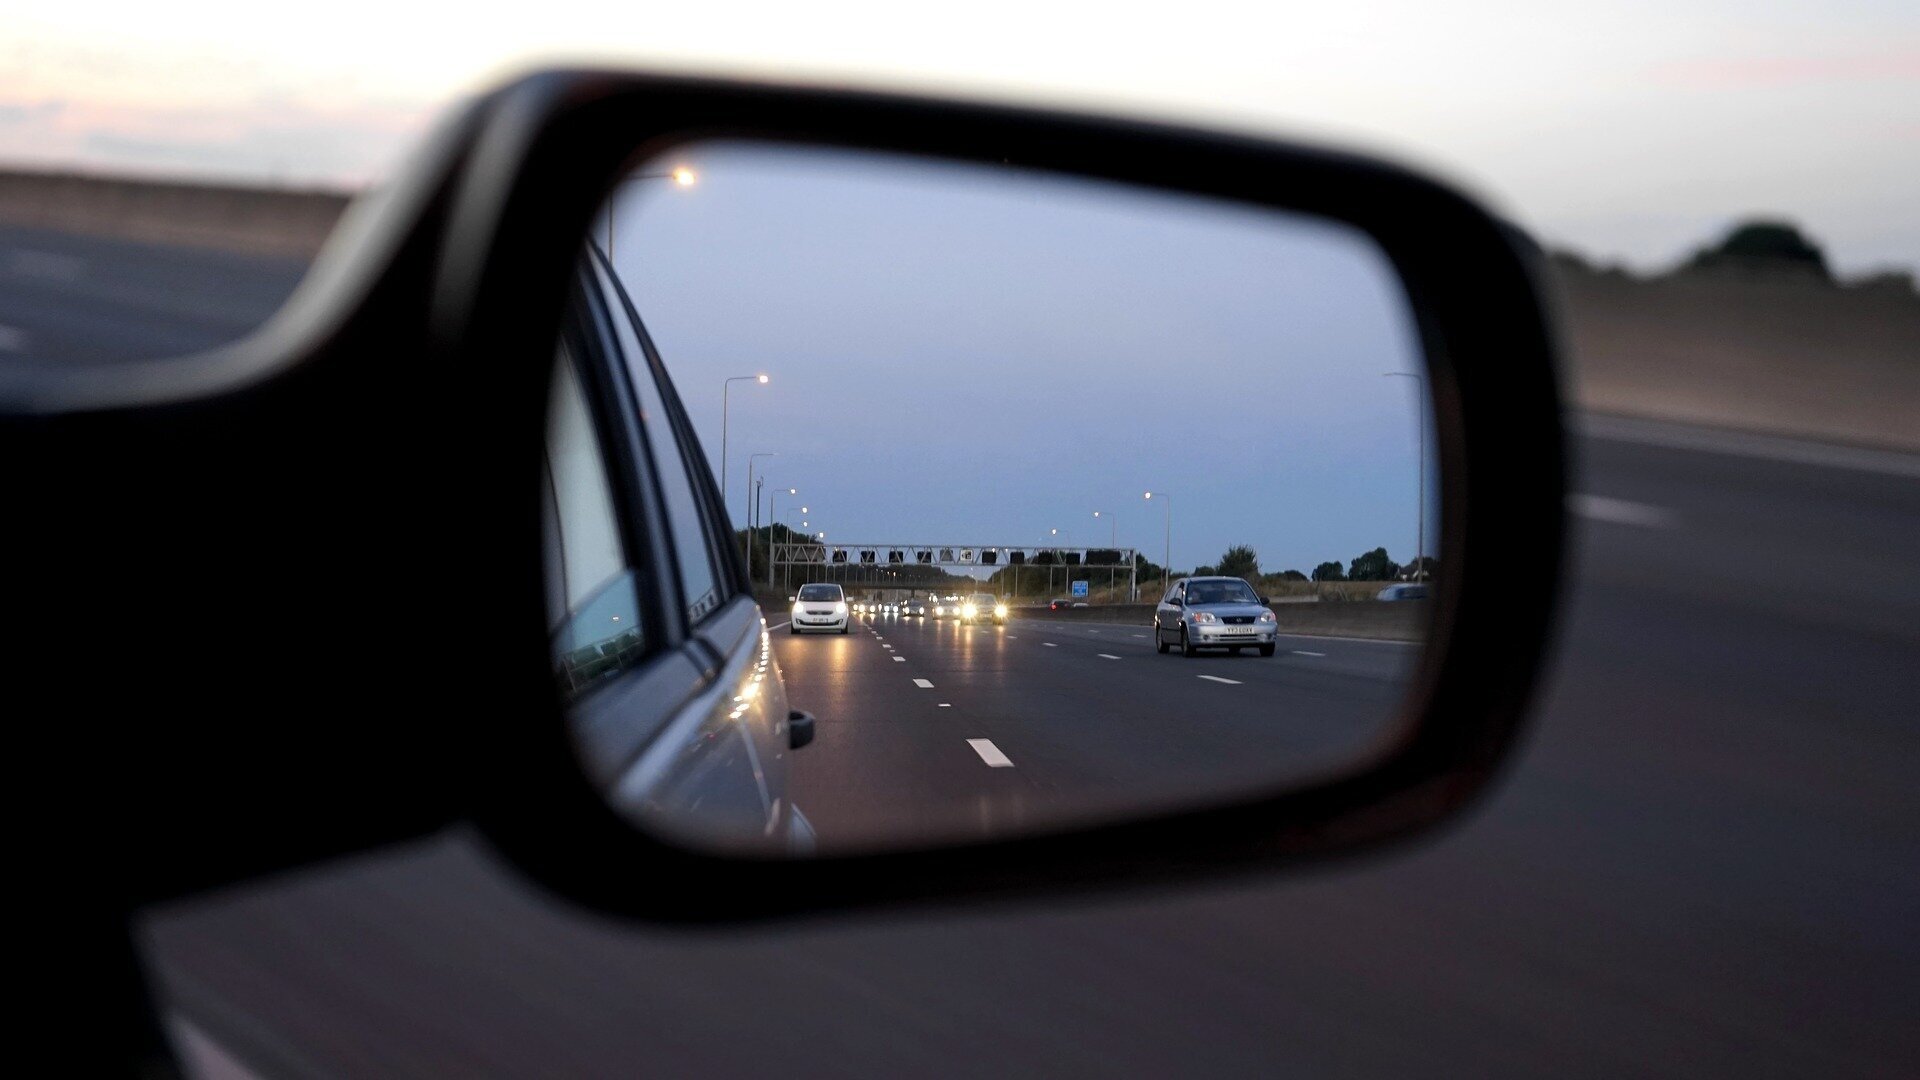 Leave Broken Glass In Your Rear View!